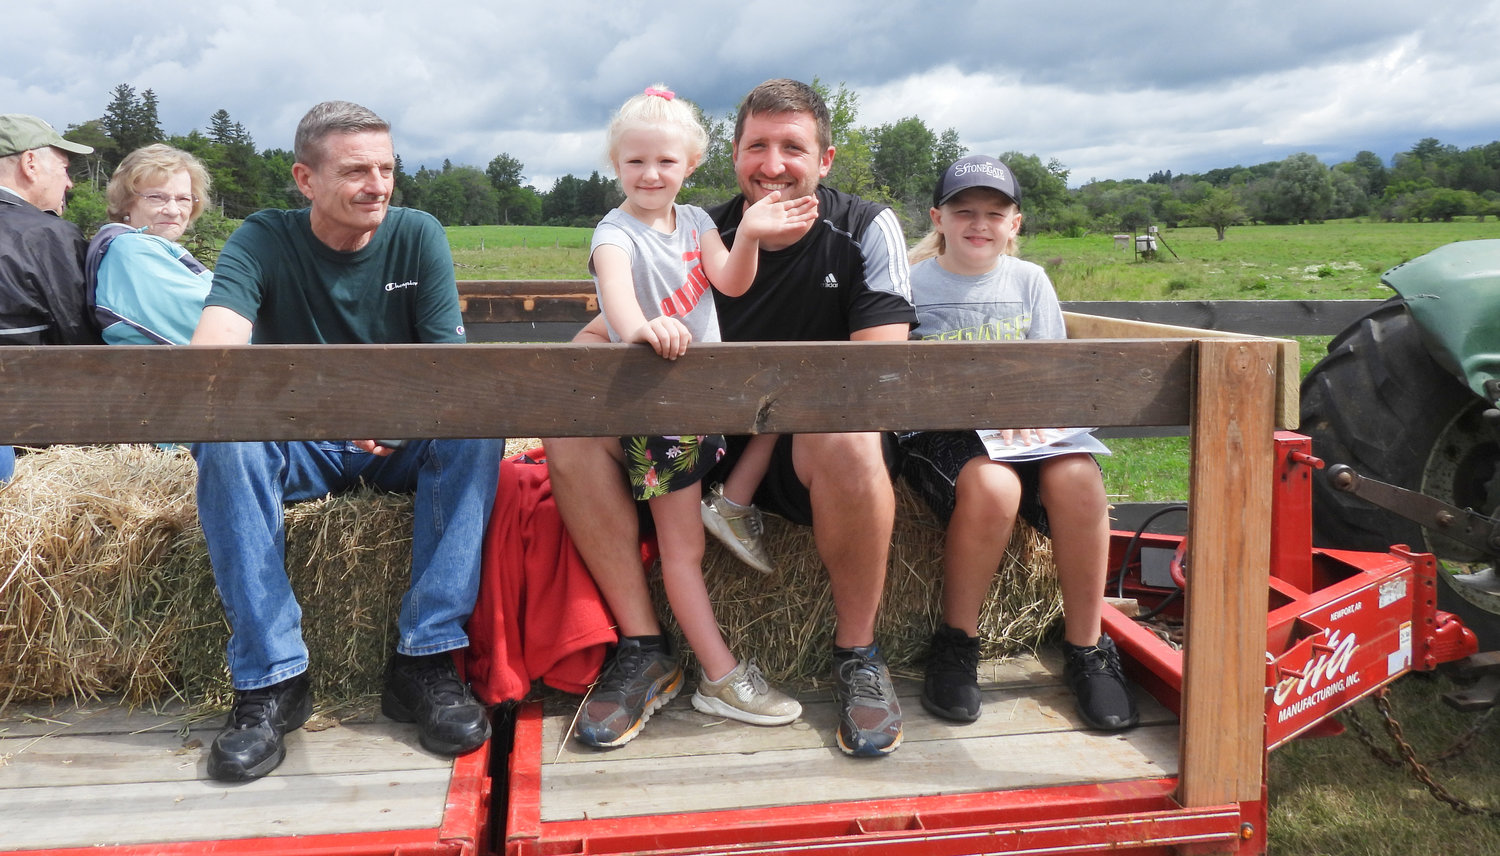 A little girl waves during a tractor ride at Albanese Longhorns in Cazenovia. Open Farm Day on Saturday, July 30 saw people from all over visiting their local farms and seeing firsthand what they offer to the community.